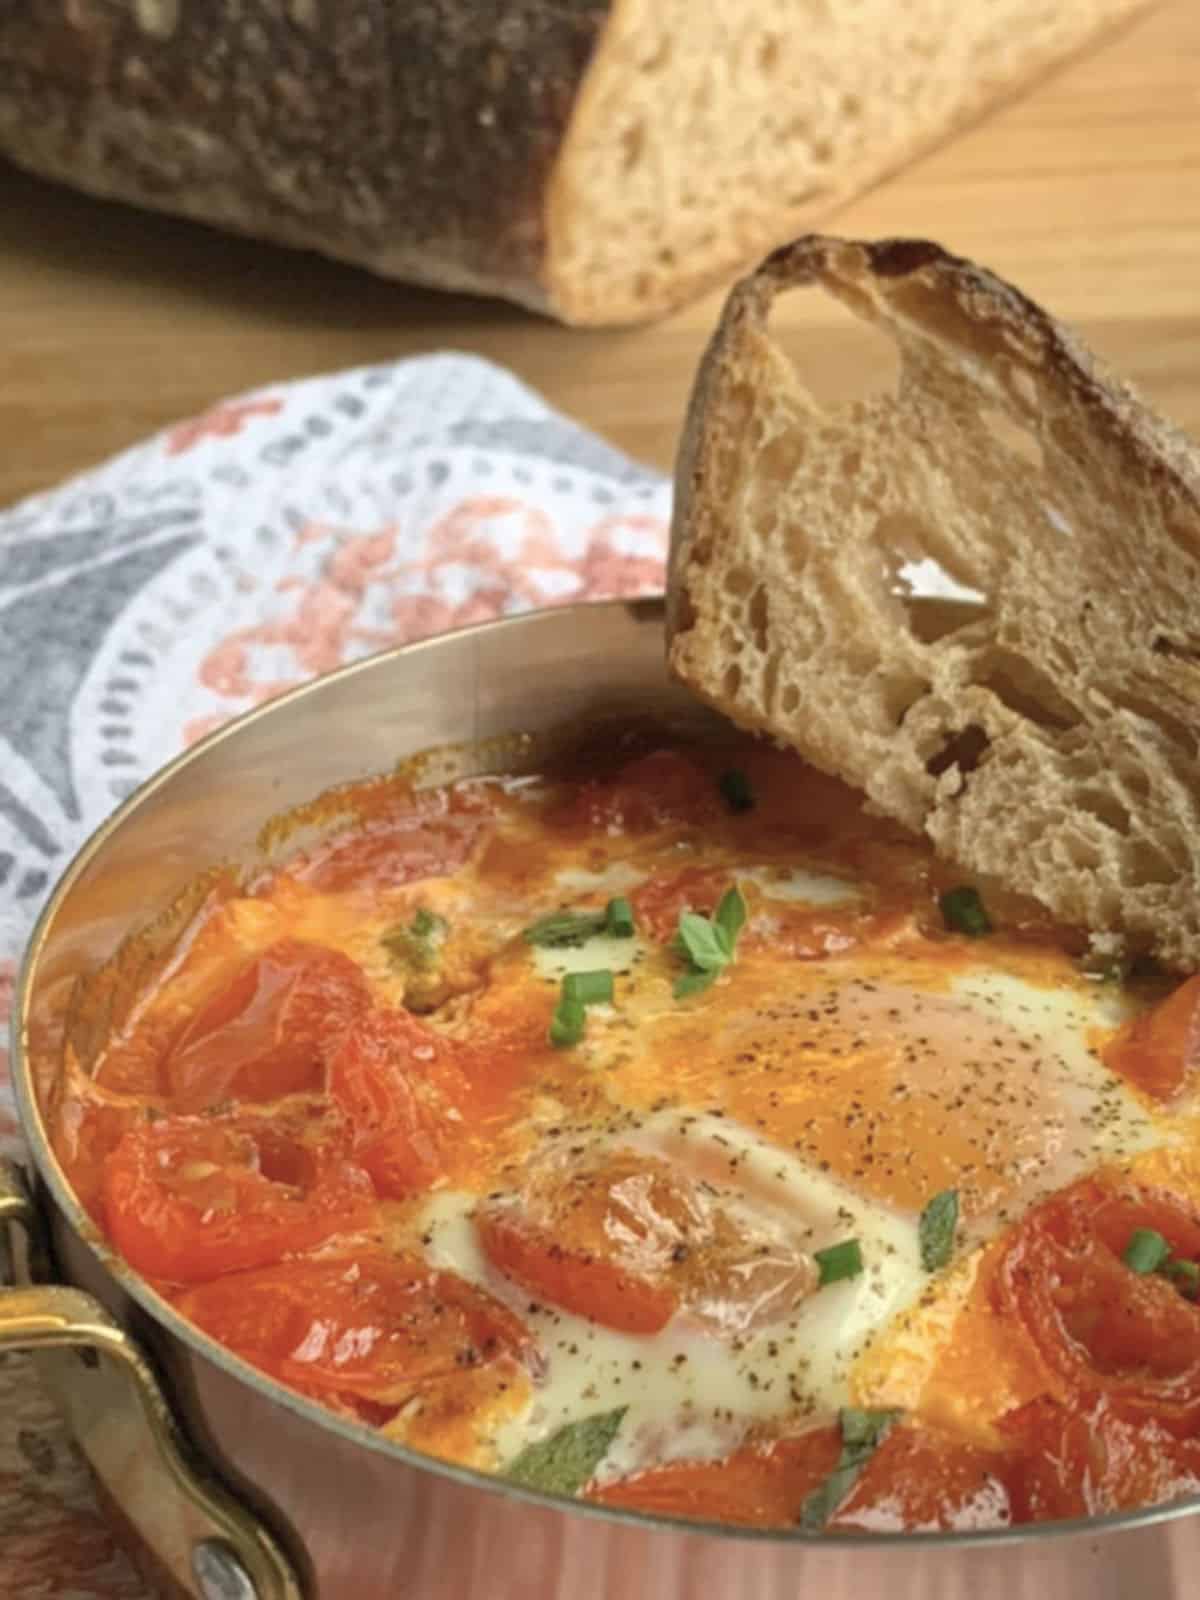 The shirred eggs  and tomato confit in a small copper pan with a crusty bread. 